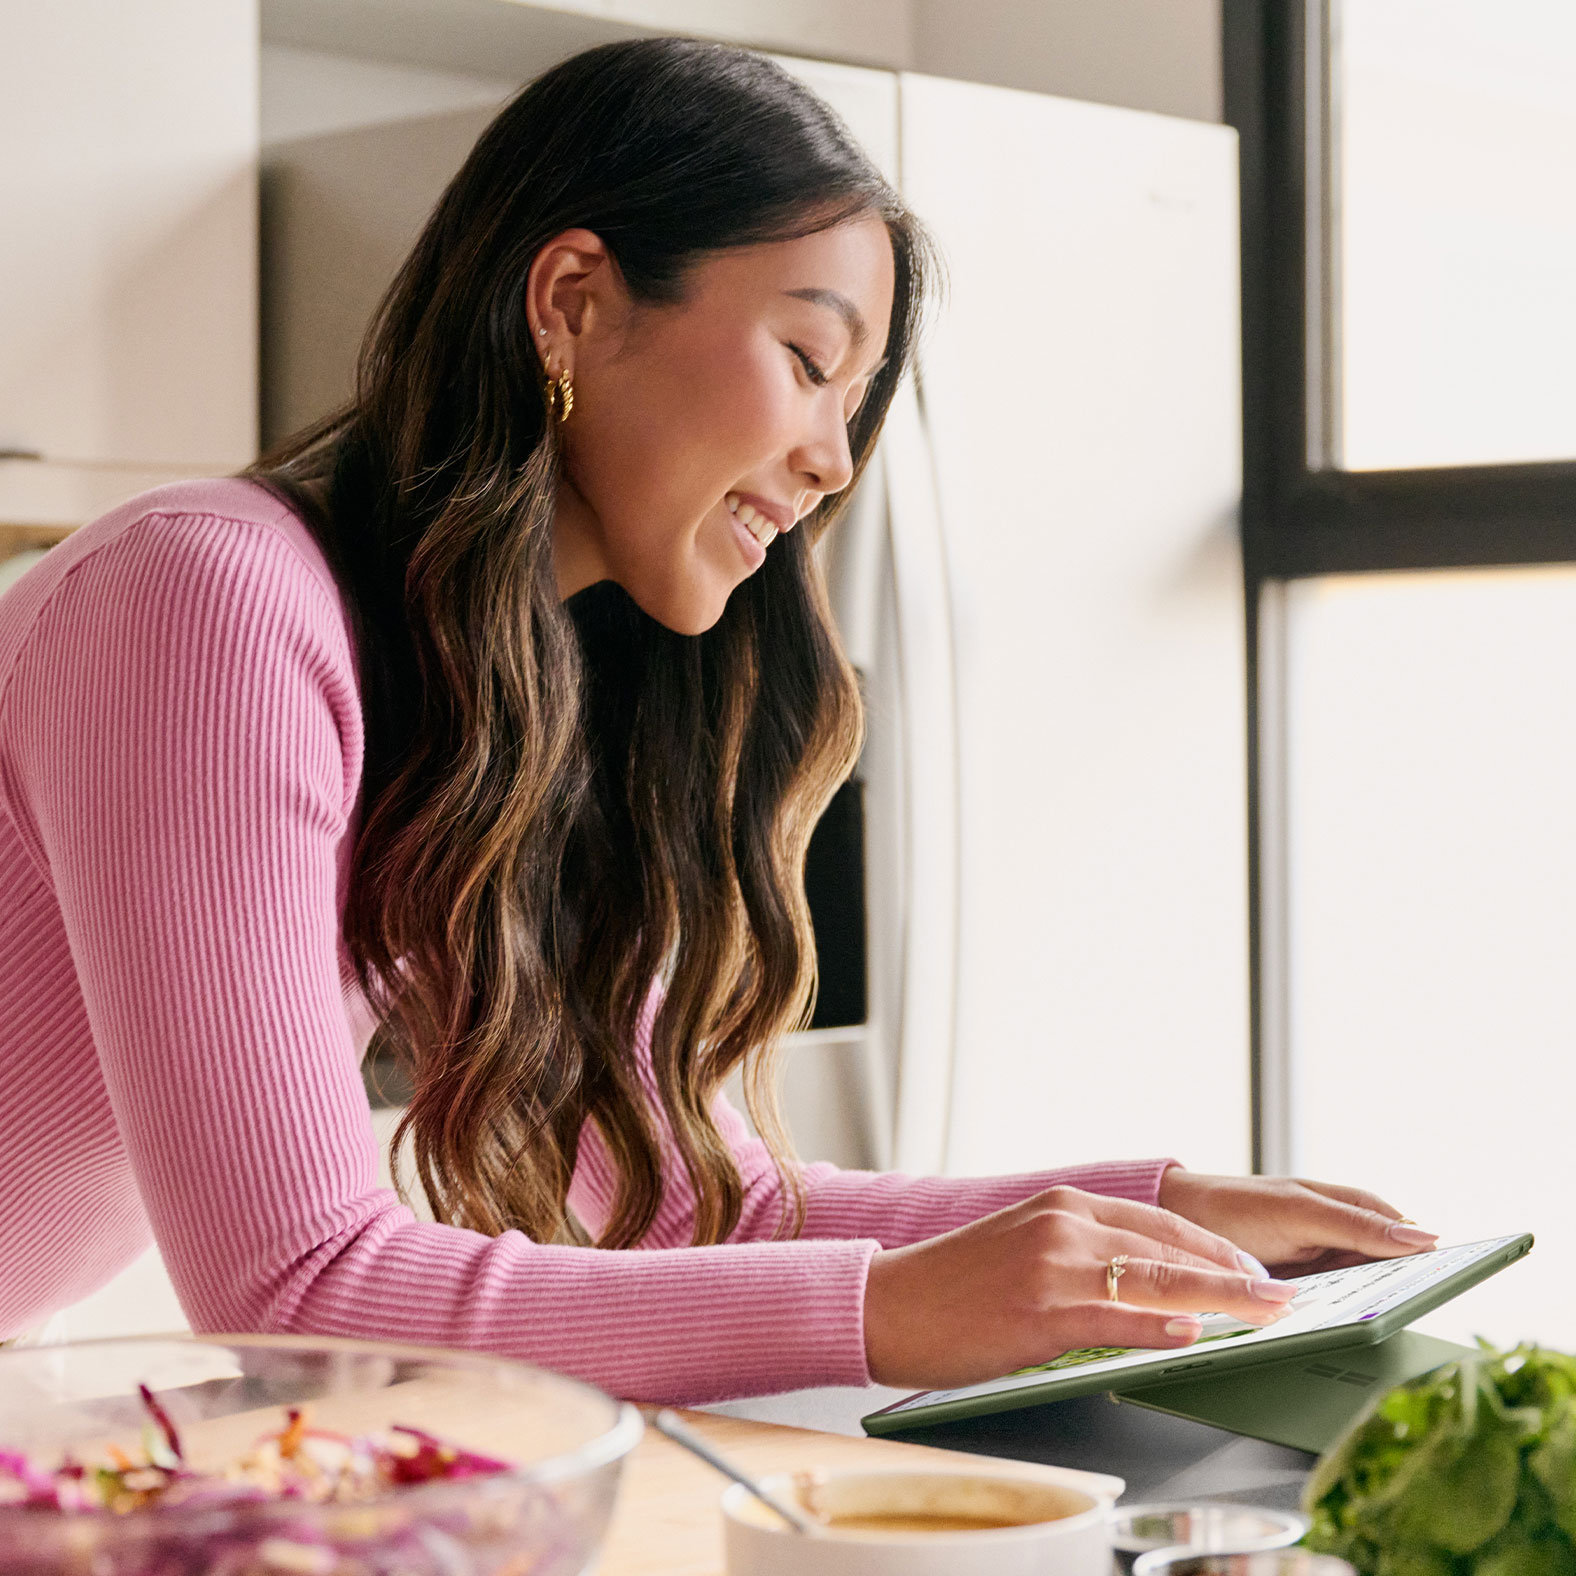 A woman interacts with her Surface Pro 9 touchscreen while preparing a salad in the kitchen.